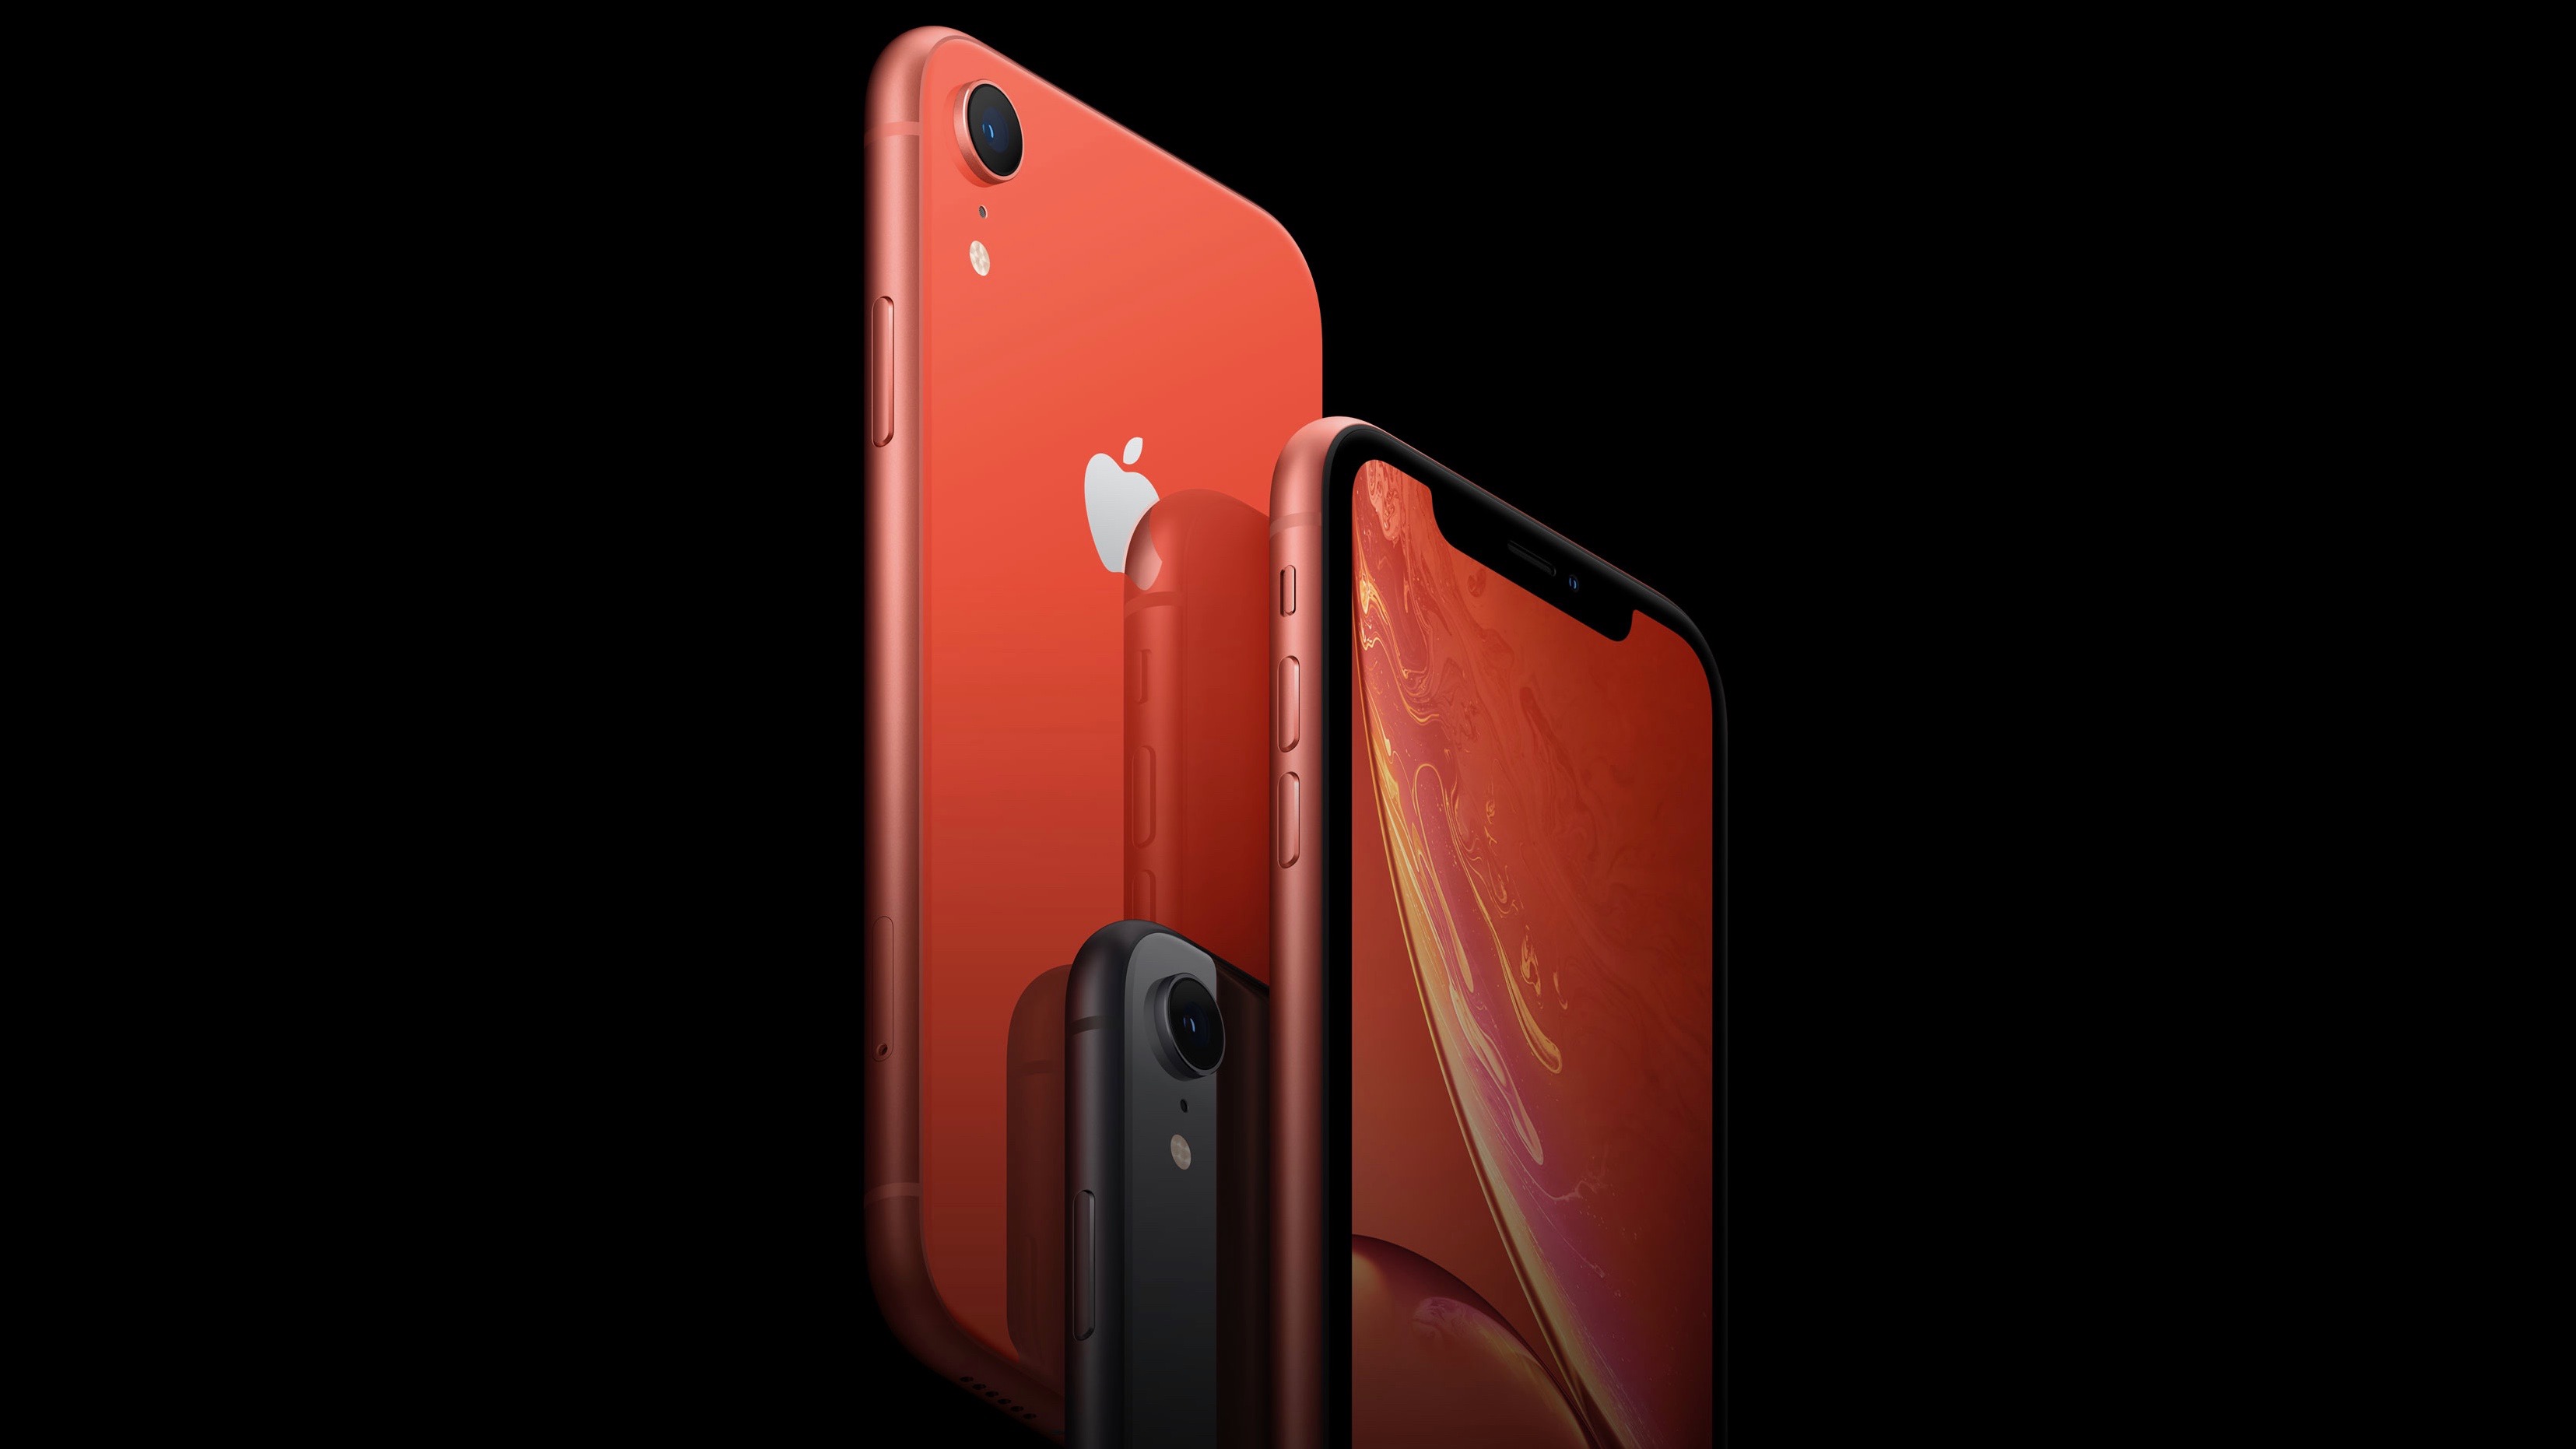 Download the iPhone XR wallpapers here [Gallery] - 9to5Mac